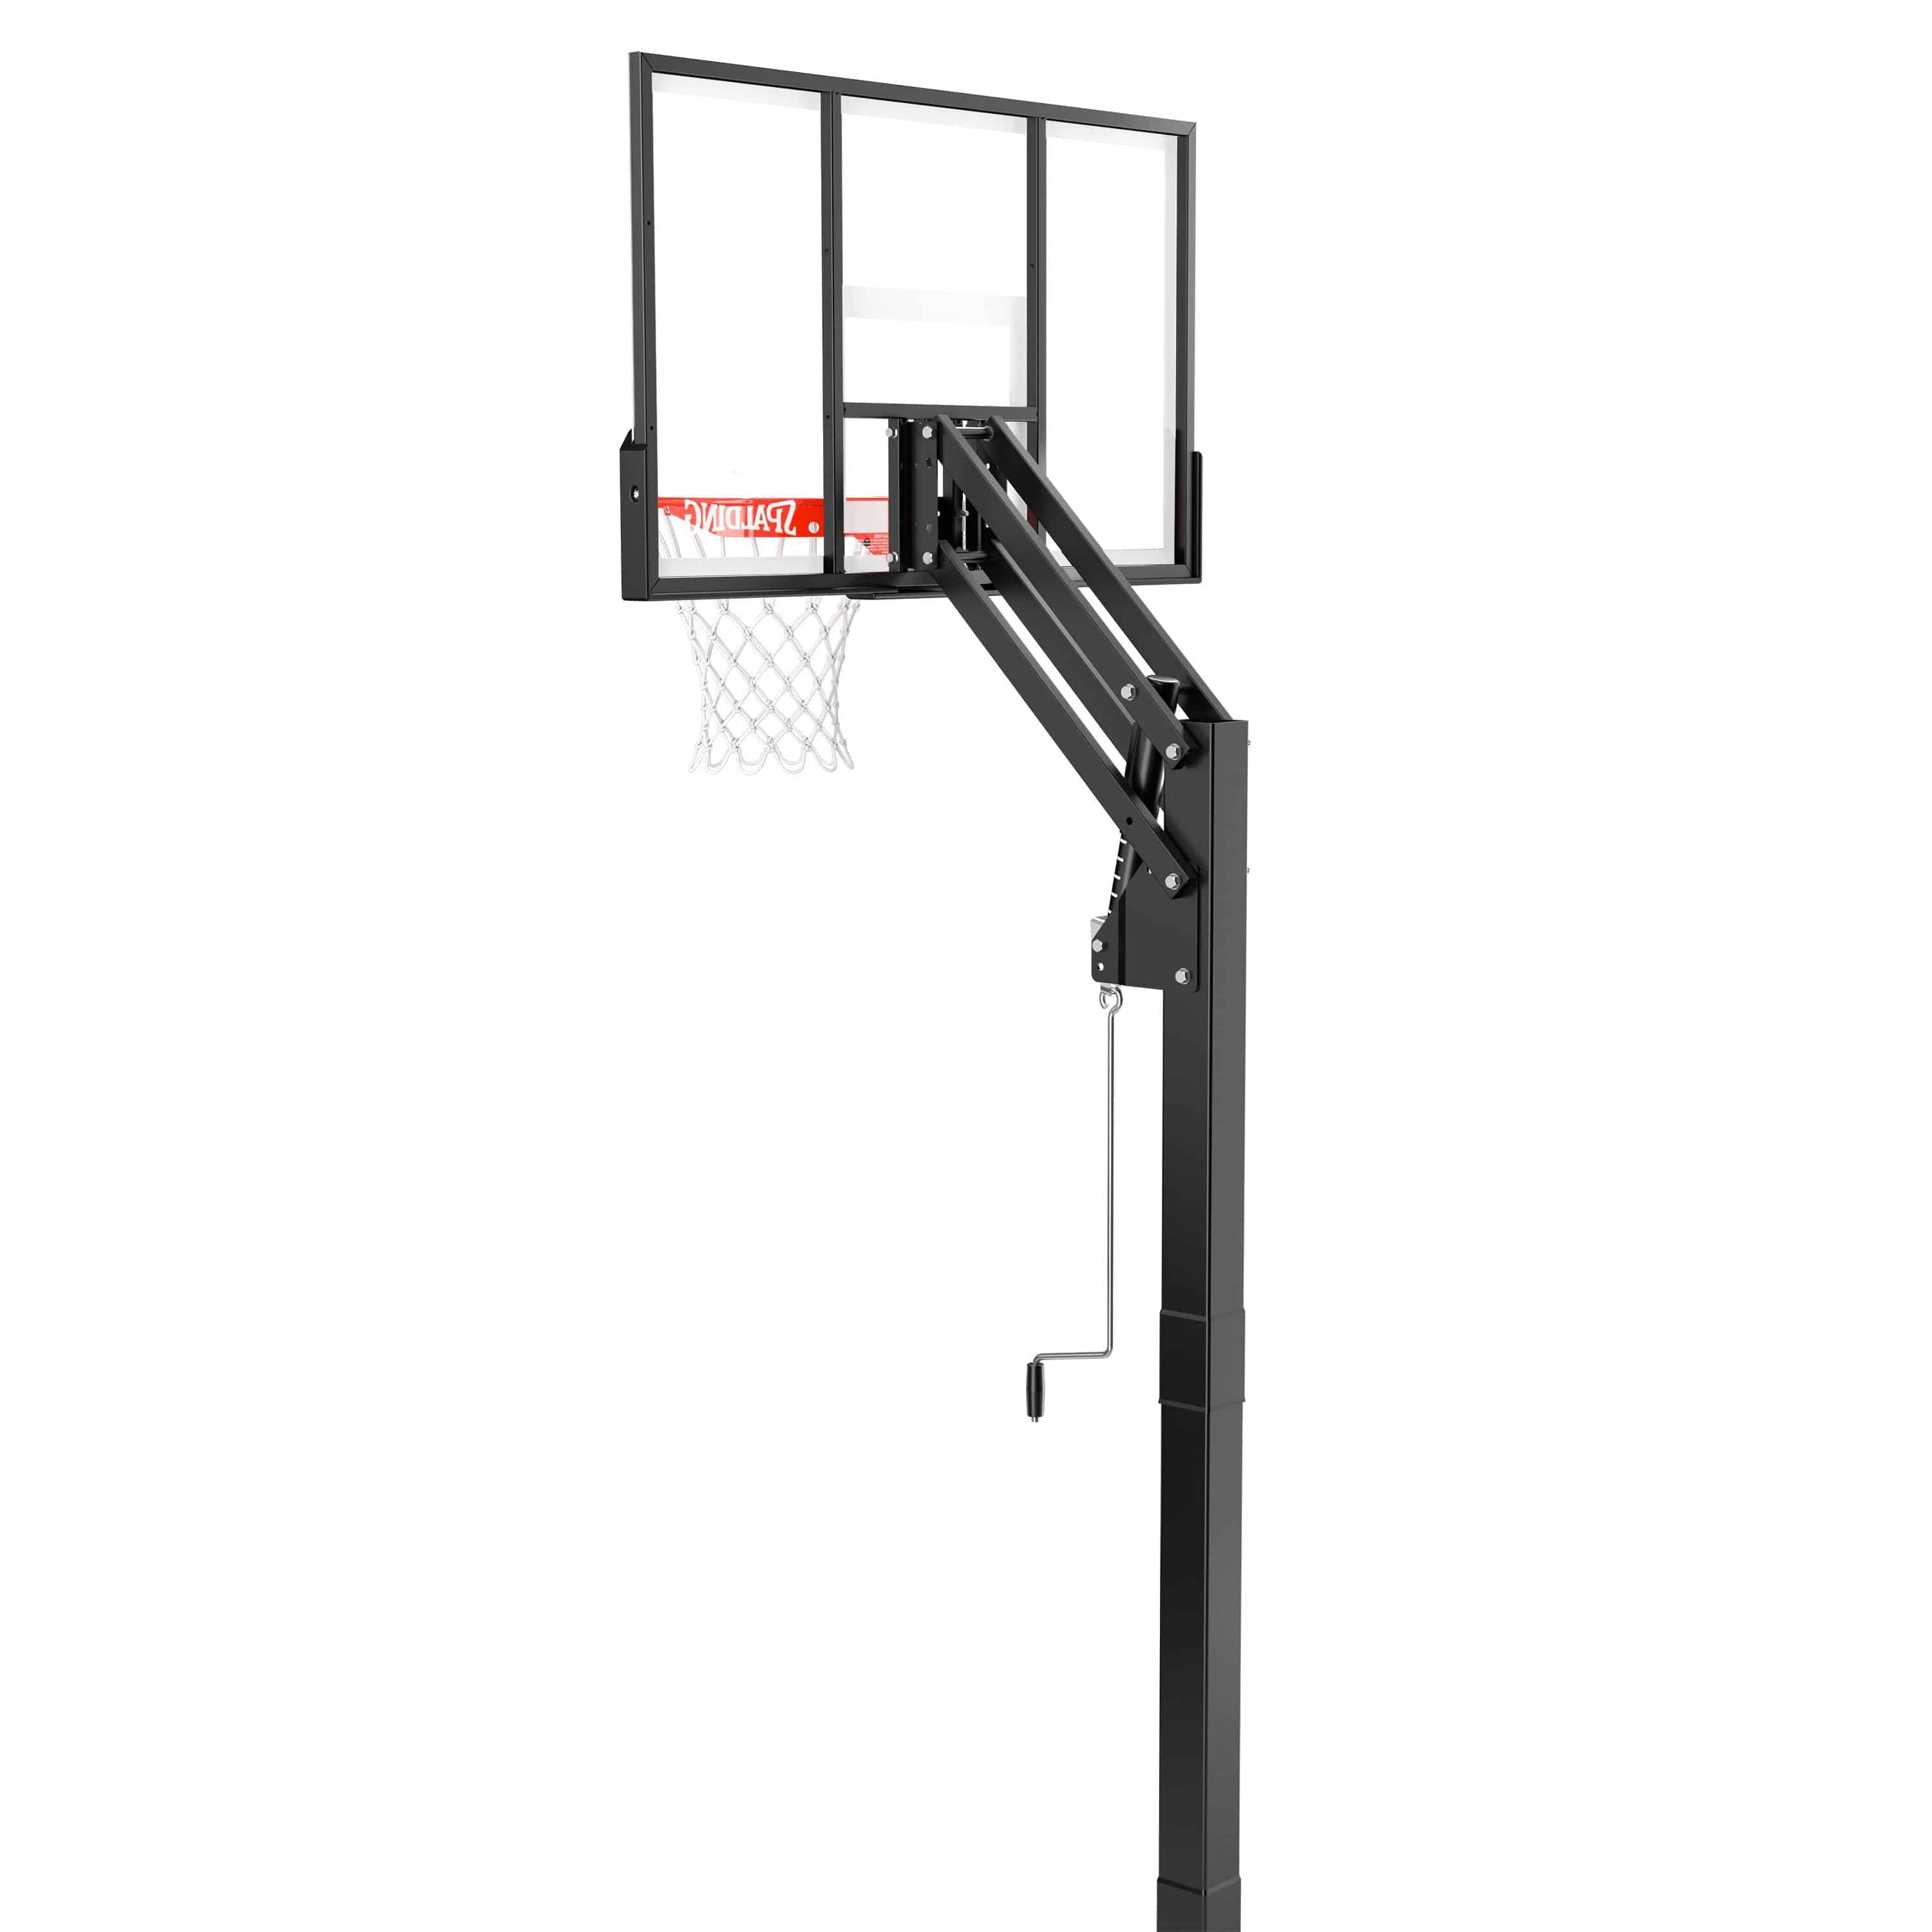 Dr.Dunk Portable Basketball Stand System Hoop Height Adjustable Net Ring  3.05m | eBay